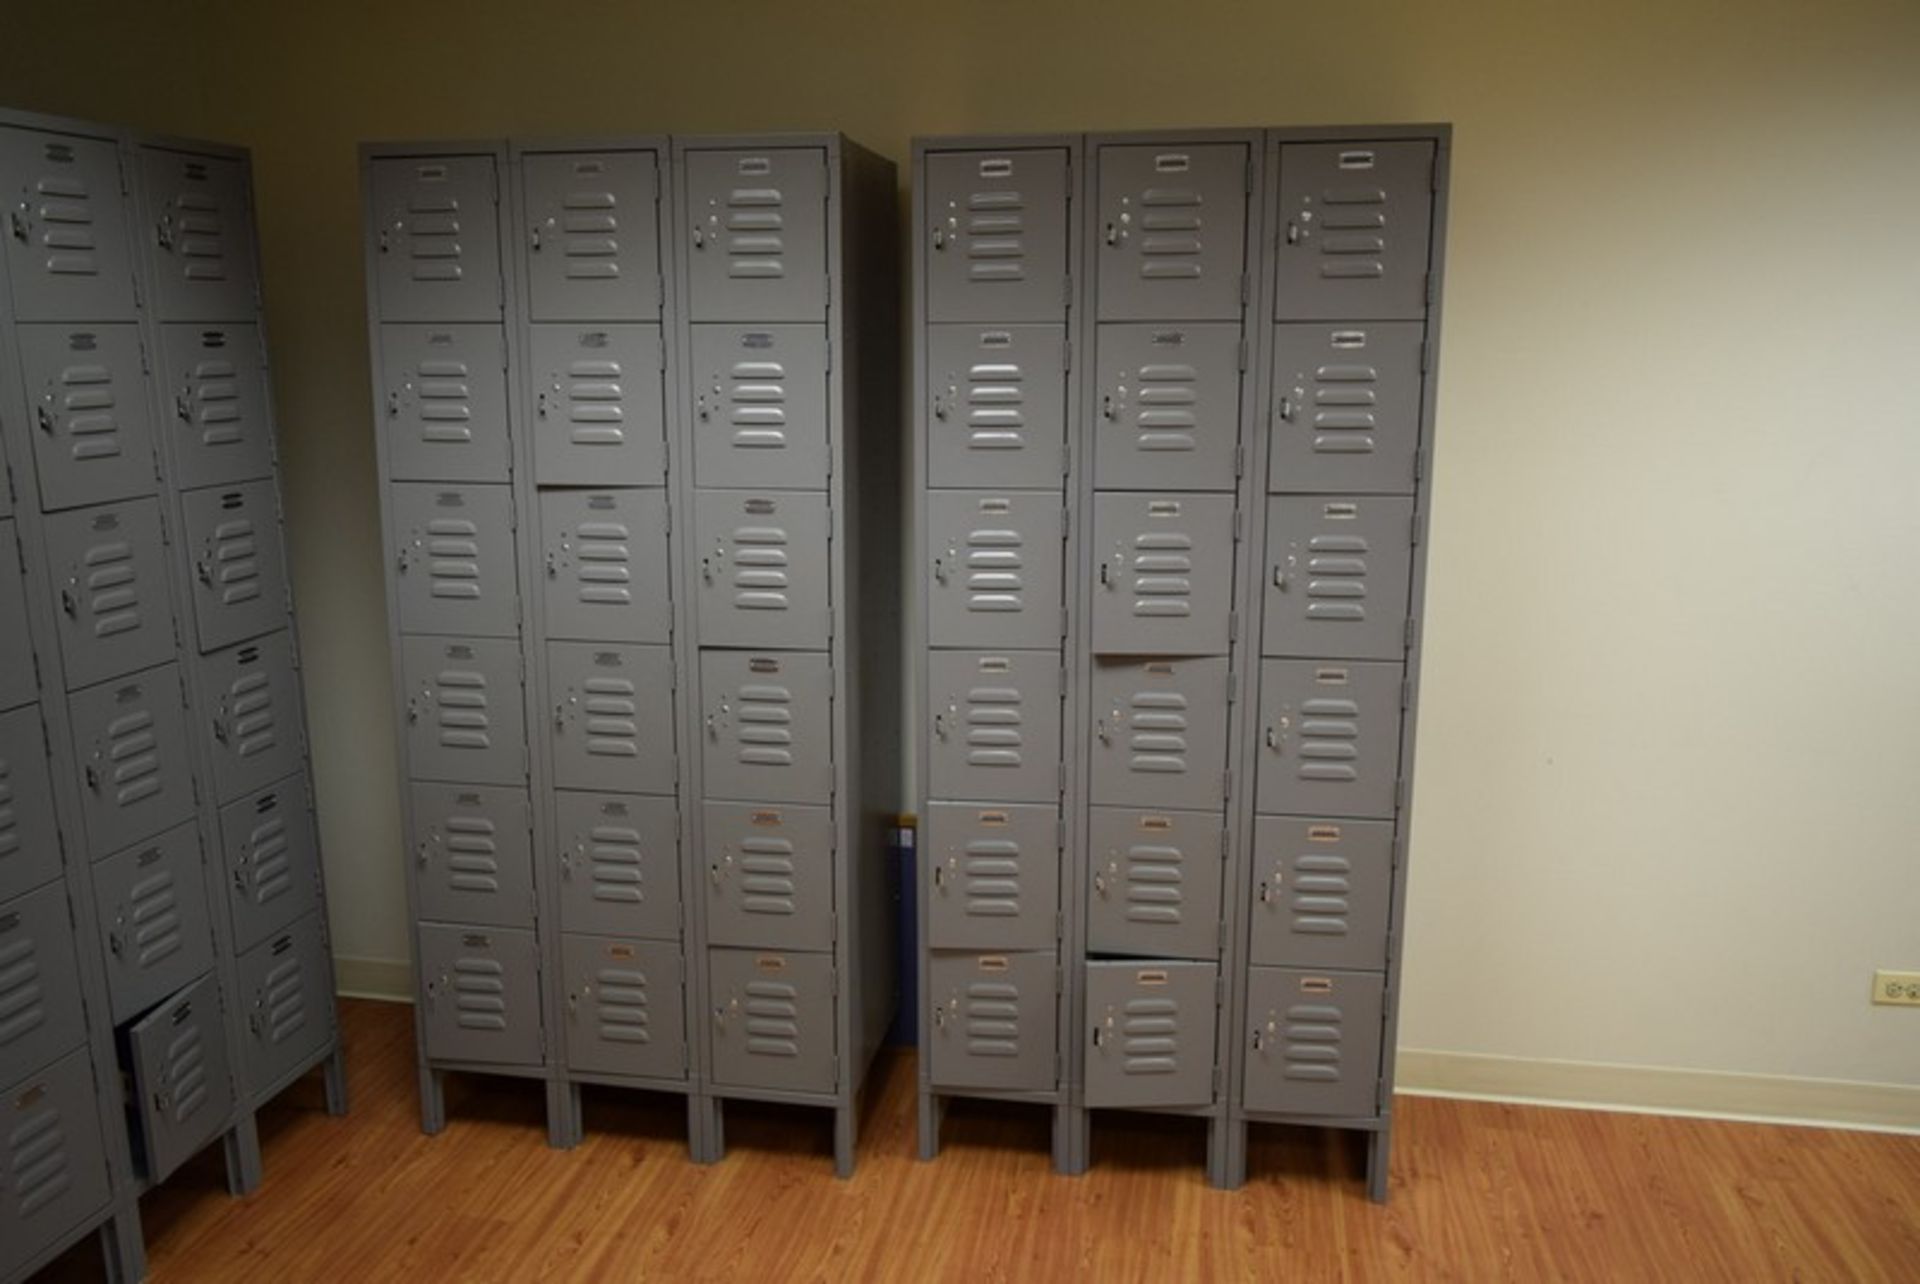 LOT: (4) SECTIONS SALSBURY 18 SECTION METAL MINI LOCKERS - Image 2 of 3